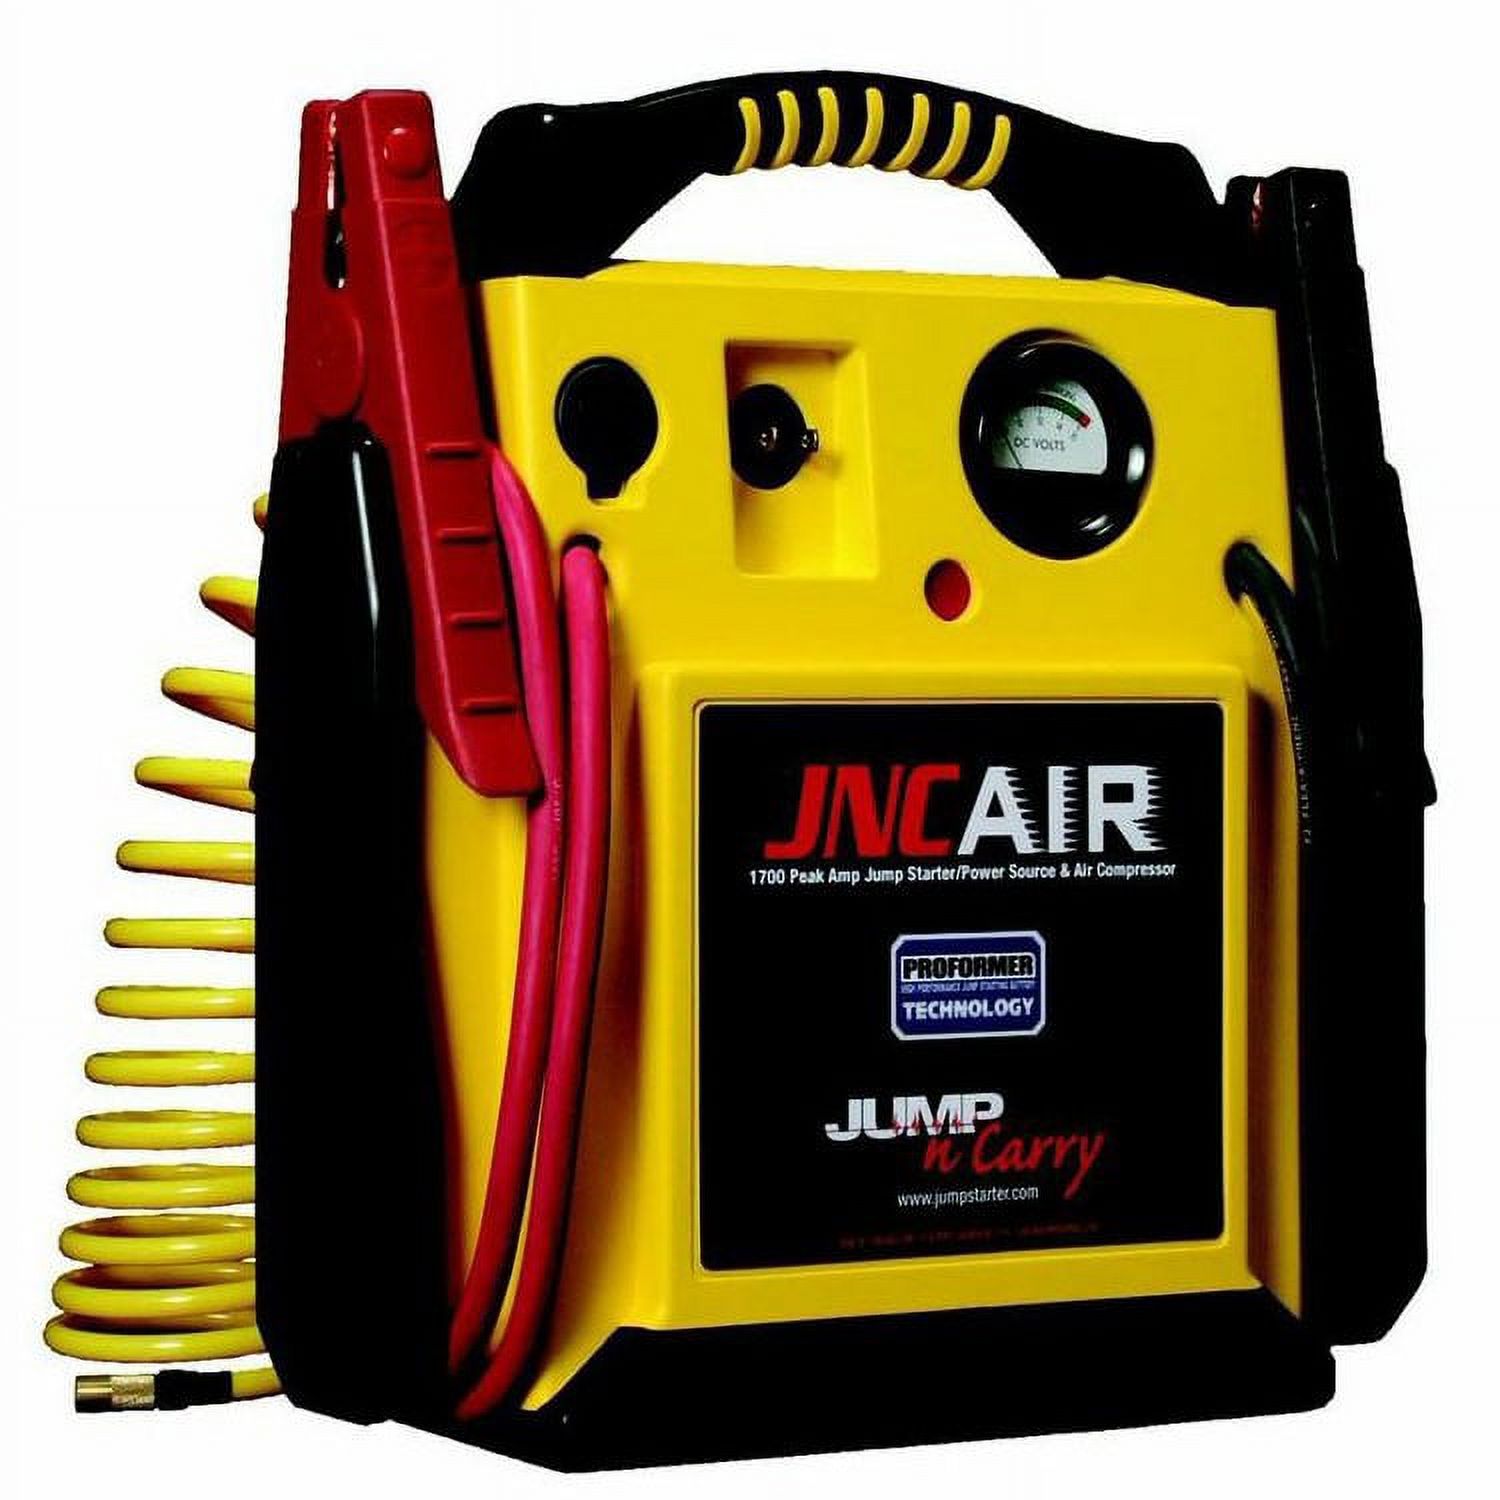 Jump-N-Carry AIR 1,700 Peak Amp 12V Jump Starter with Integrated Air Delivery System - image 1 of 2